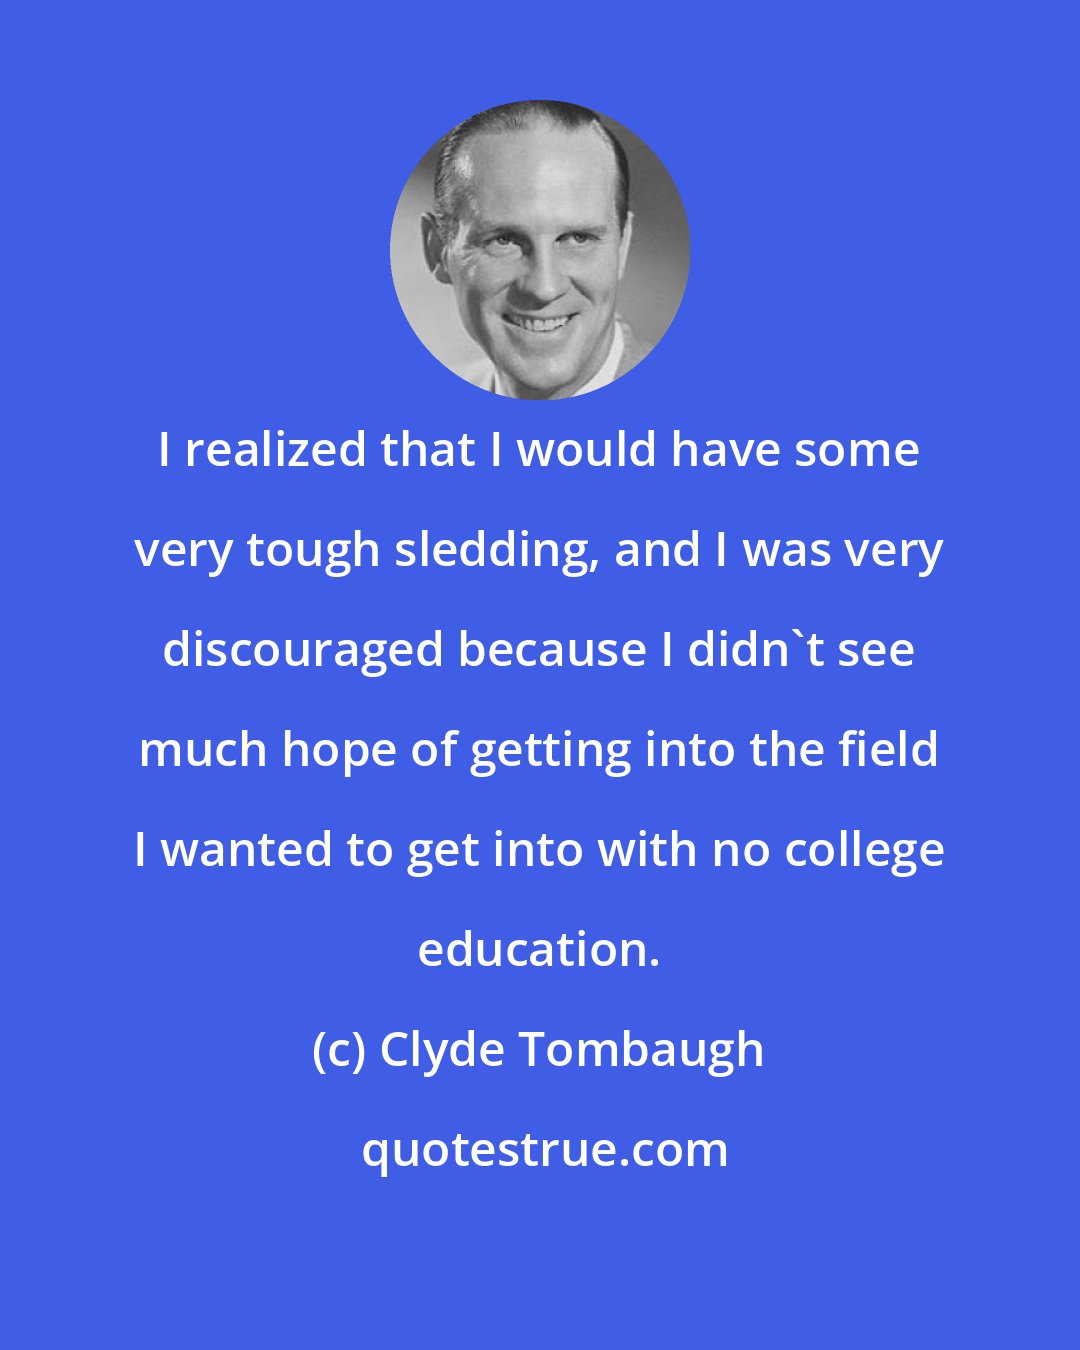 Clyde Tombaugh: I realized that I would have some very tough sledding, and I was very discouraged because I didn't see much hope of getting into the field I wanted to get into with no college education.